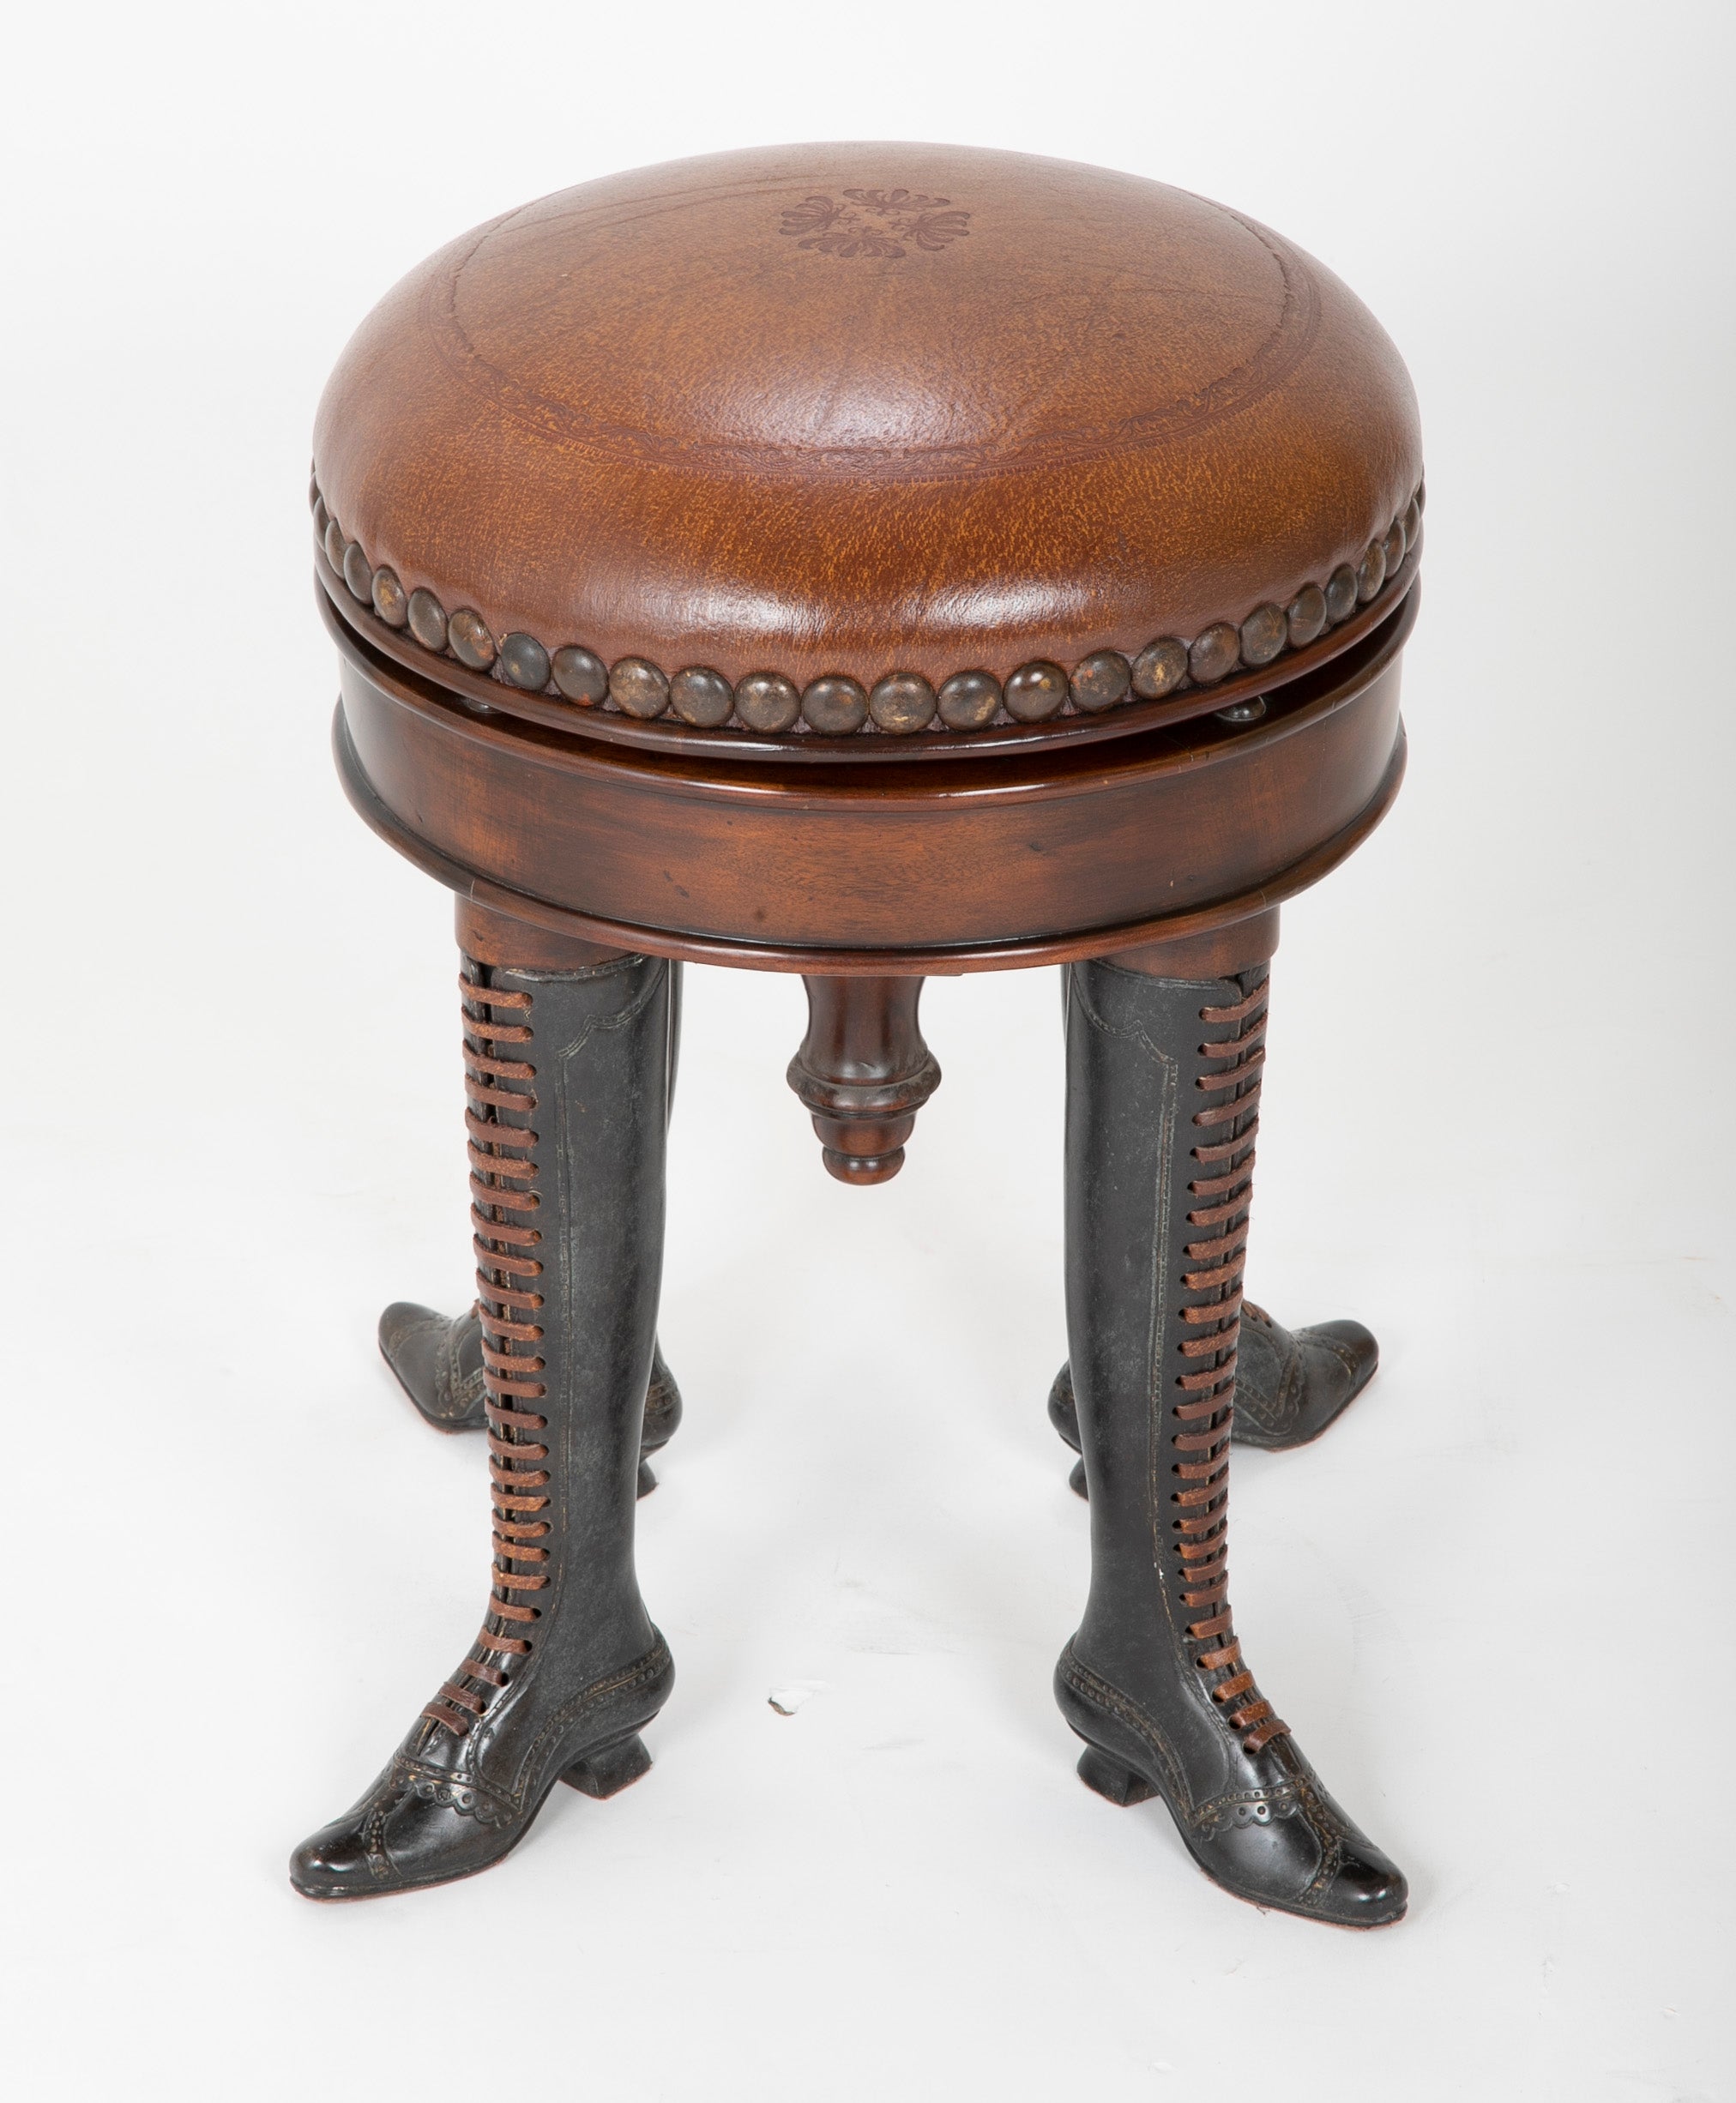 Bronze Four Legged Adjustable Revolving Stool with Leather Upholstered Seat